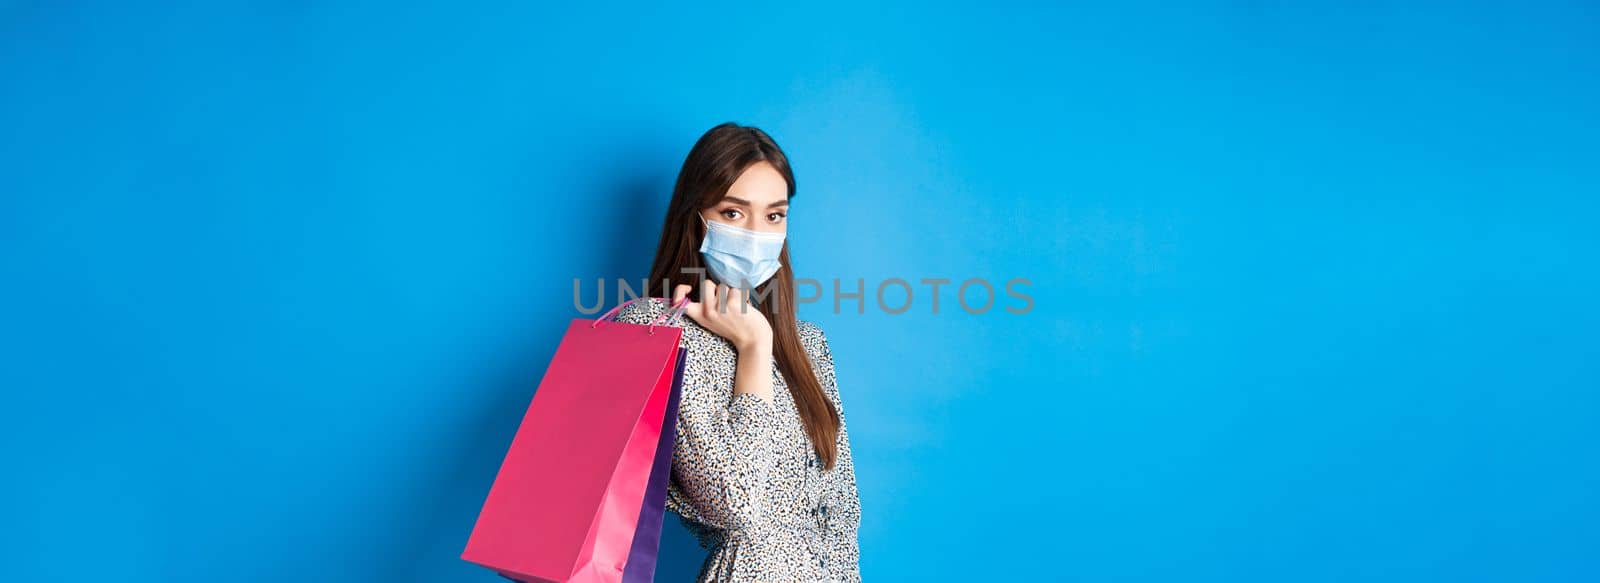 Covid-19, pandemic and lifestyle concept. Elegant woman wear medical mask on shopping, holding bags over shoulder and walking against blue background.